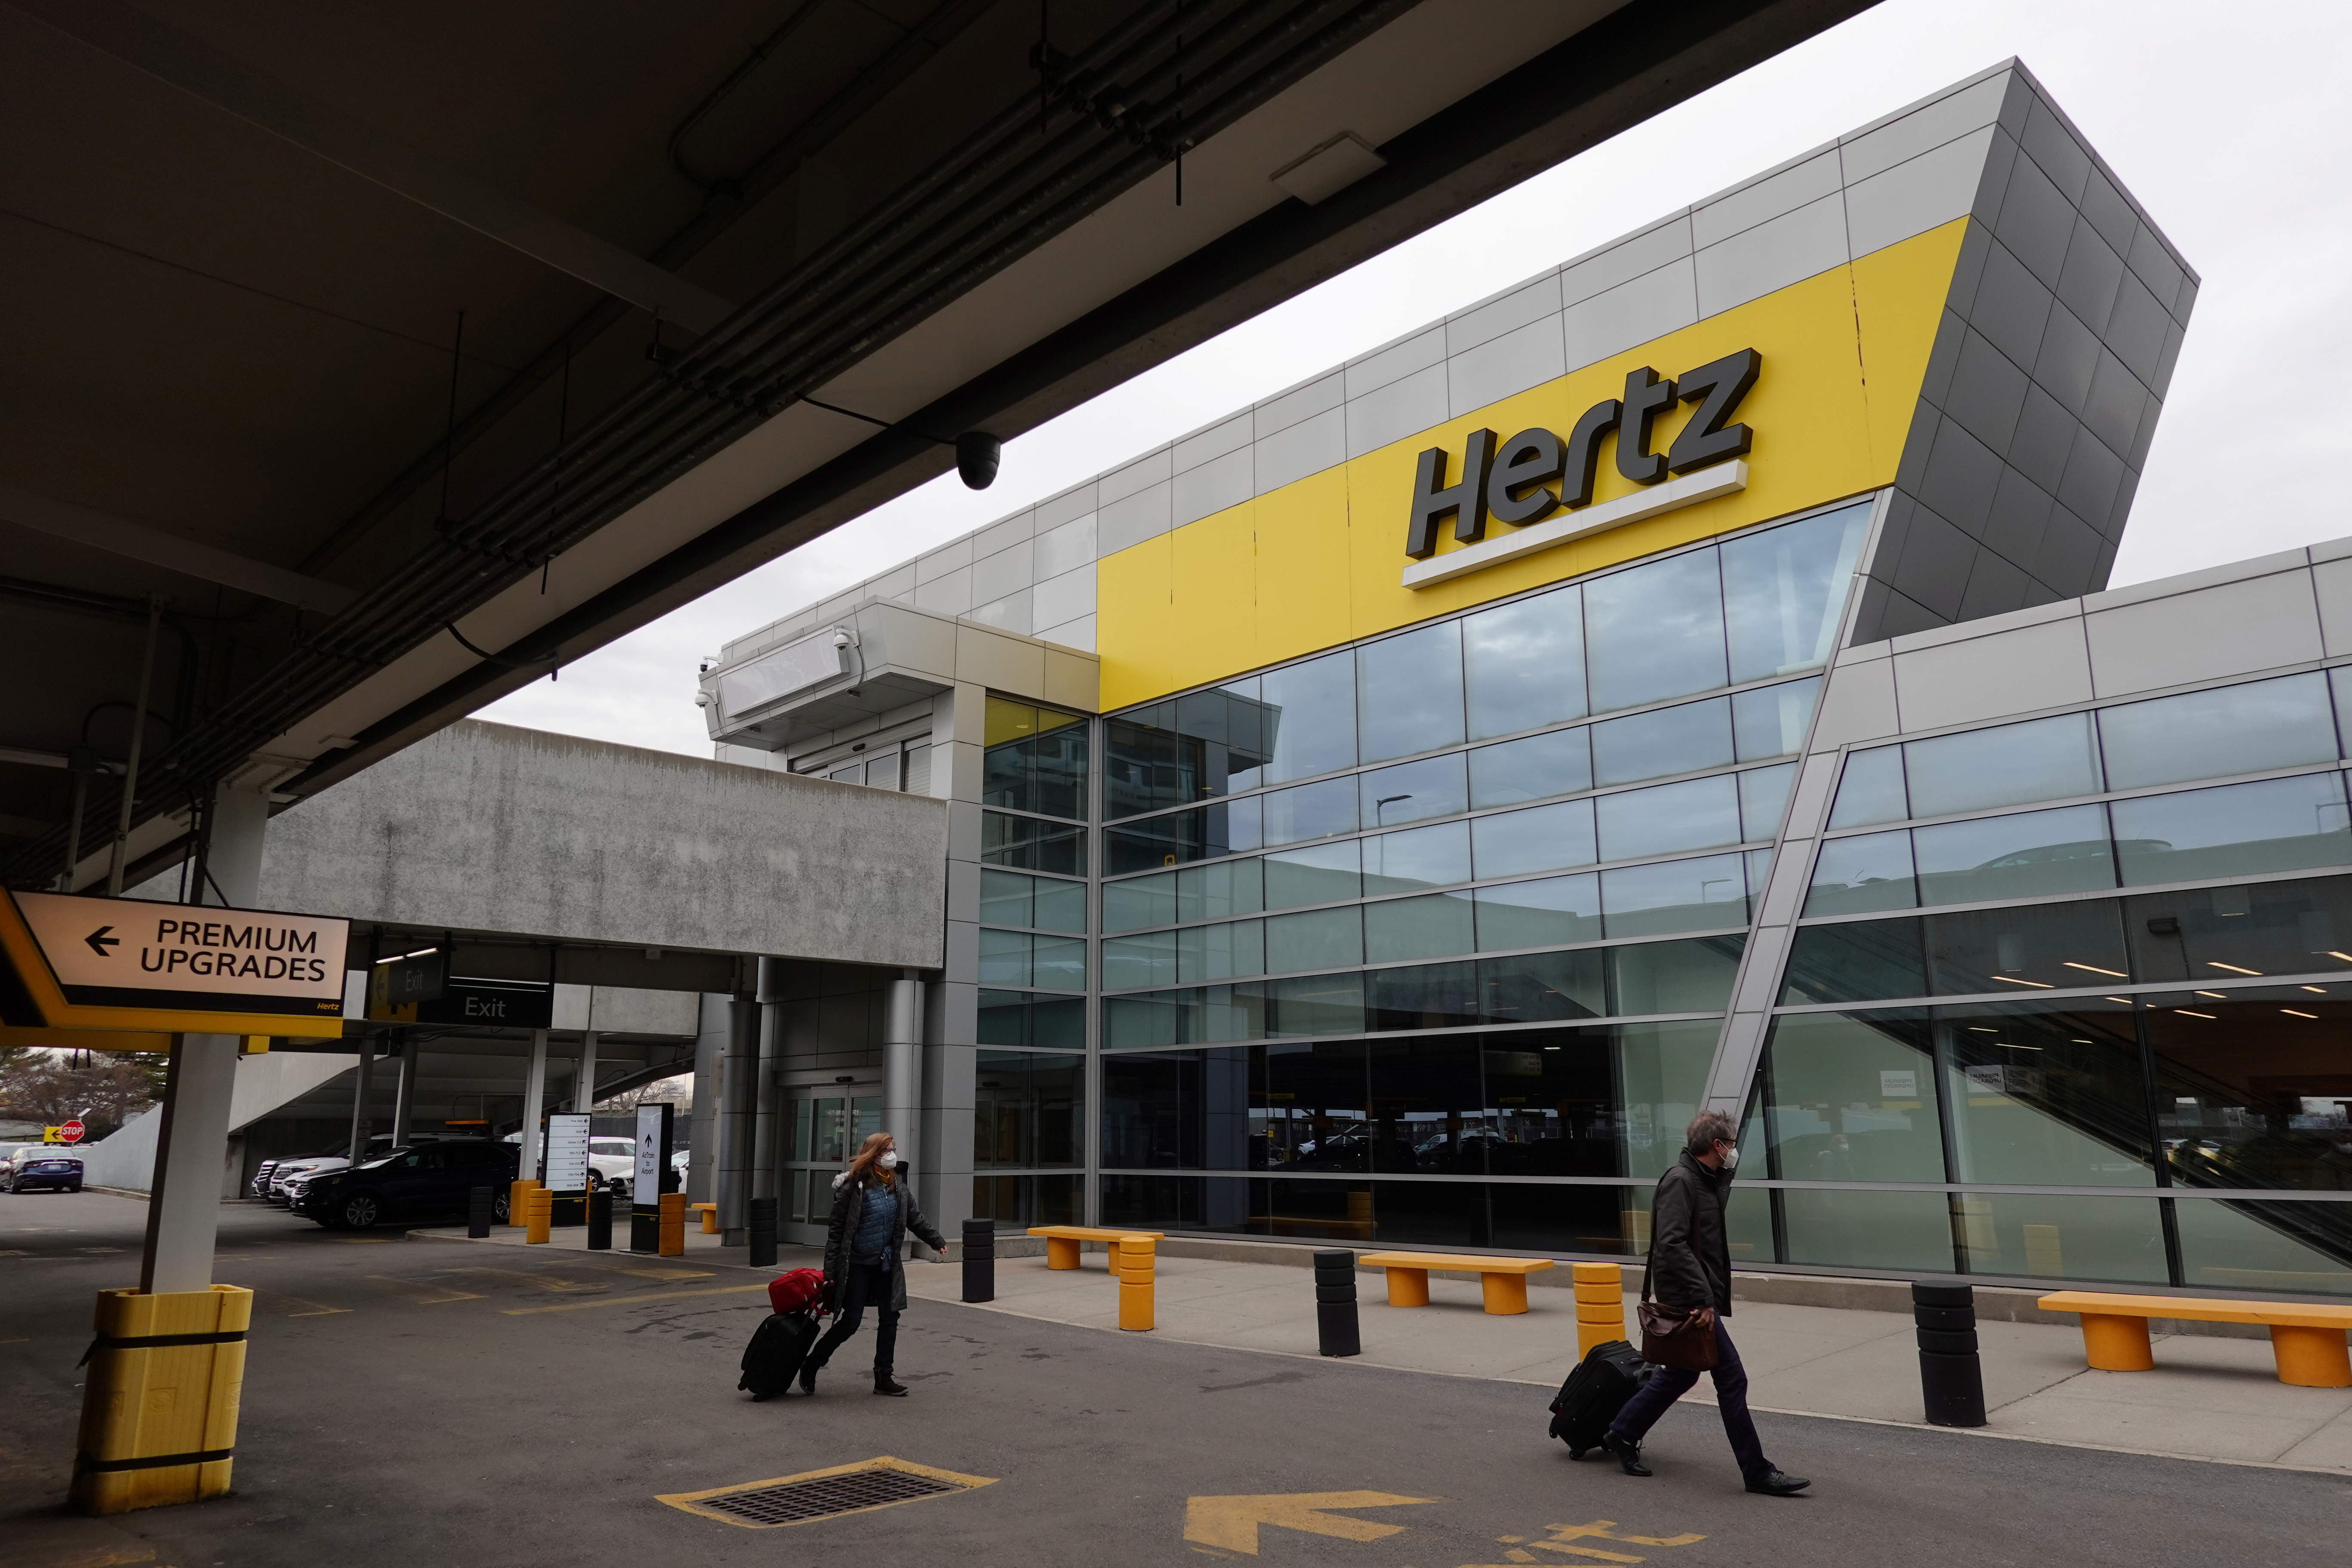 People walk by Hertz rental car signage at John F. Kennedy International Airport in Queens, New York City